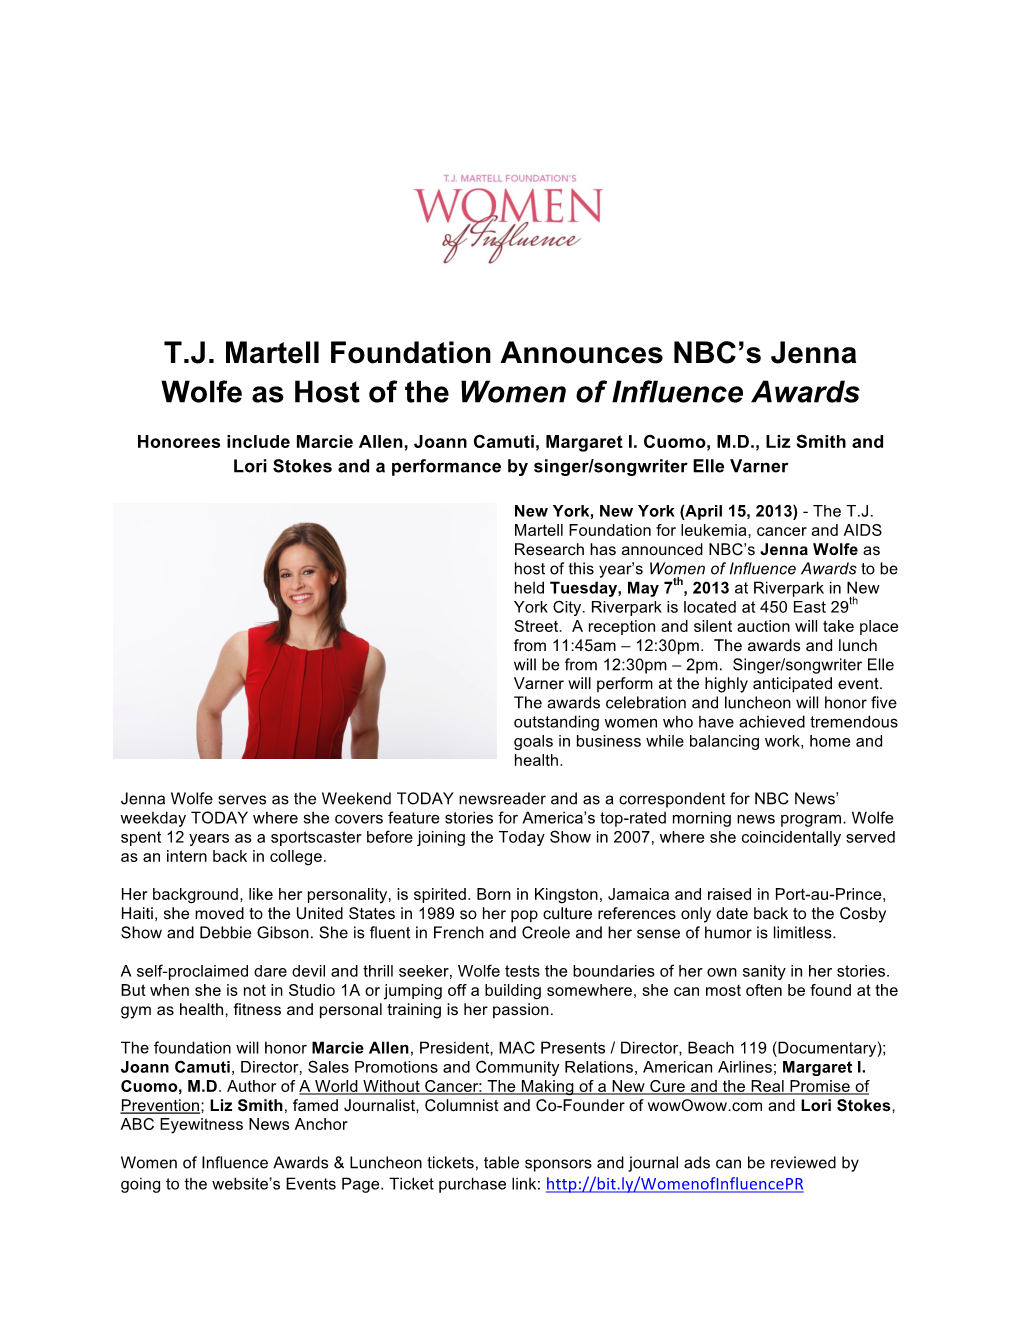 T.J. Martell Foundation Announces NBC's Jenna Wolfe As Host of The